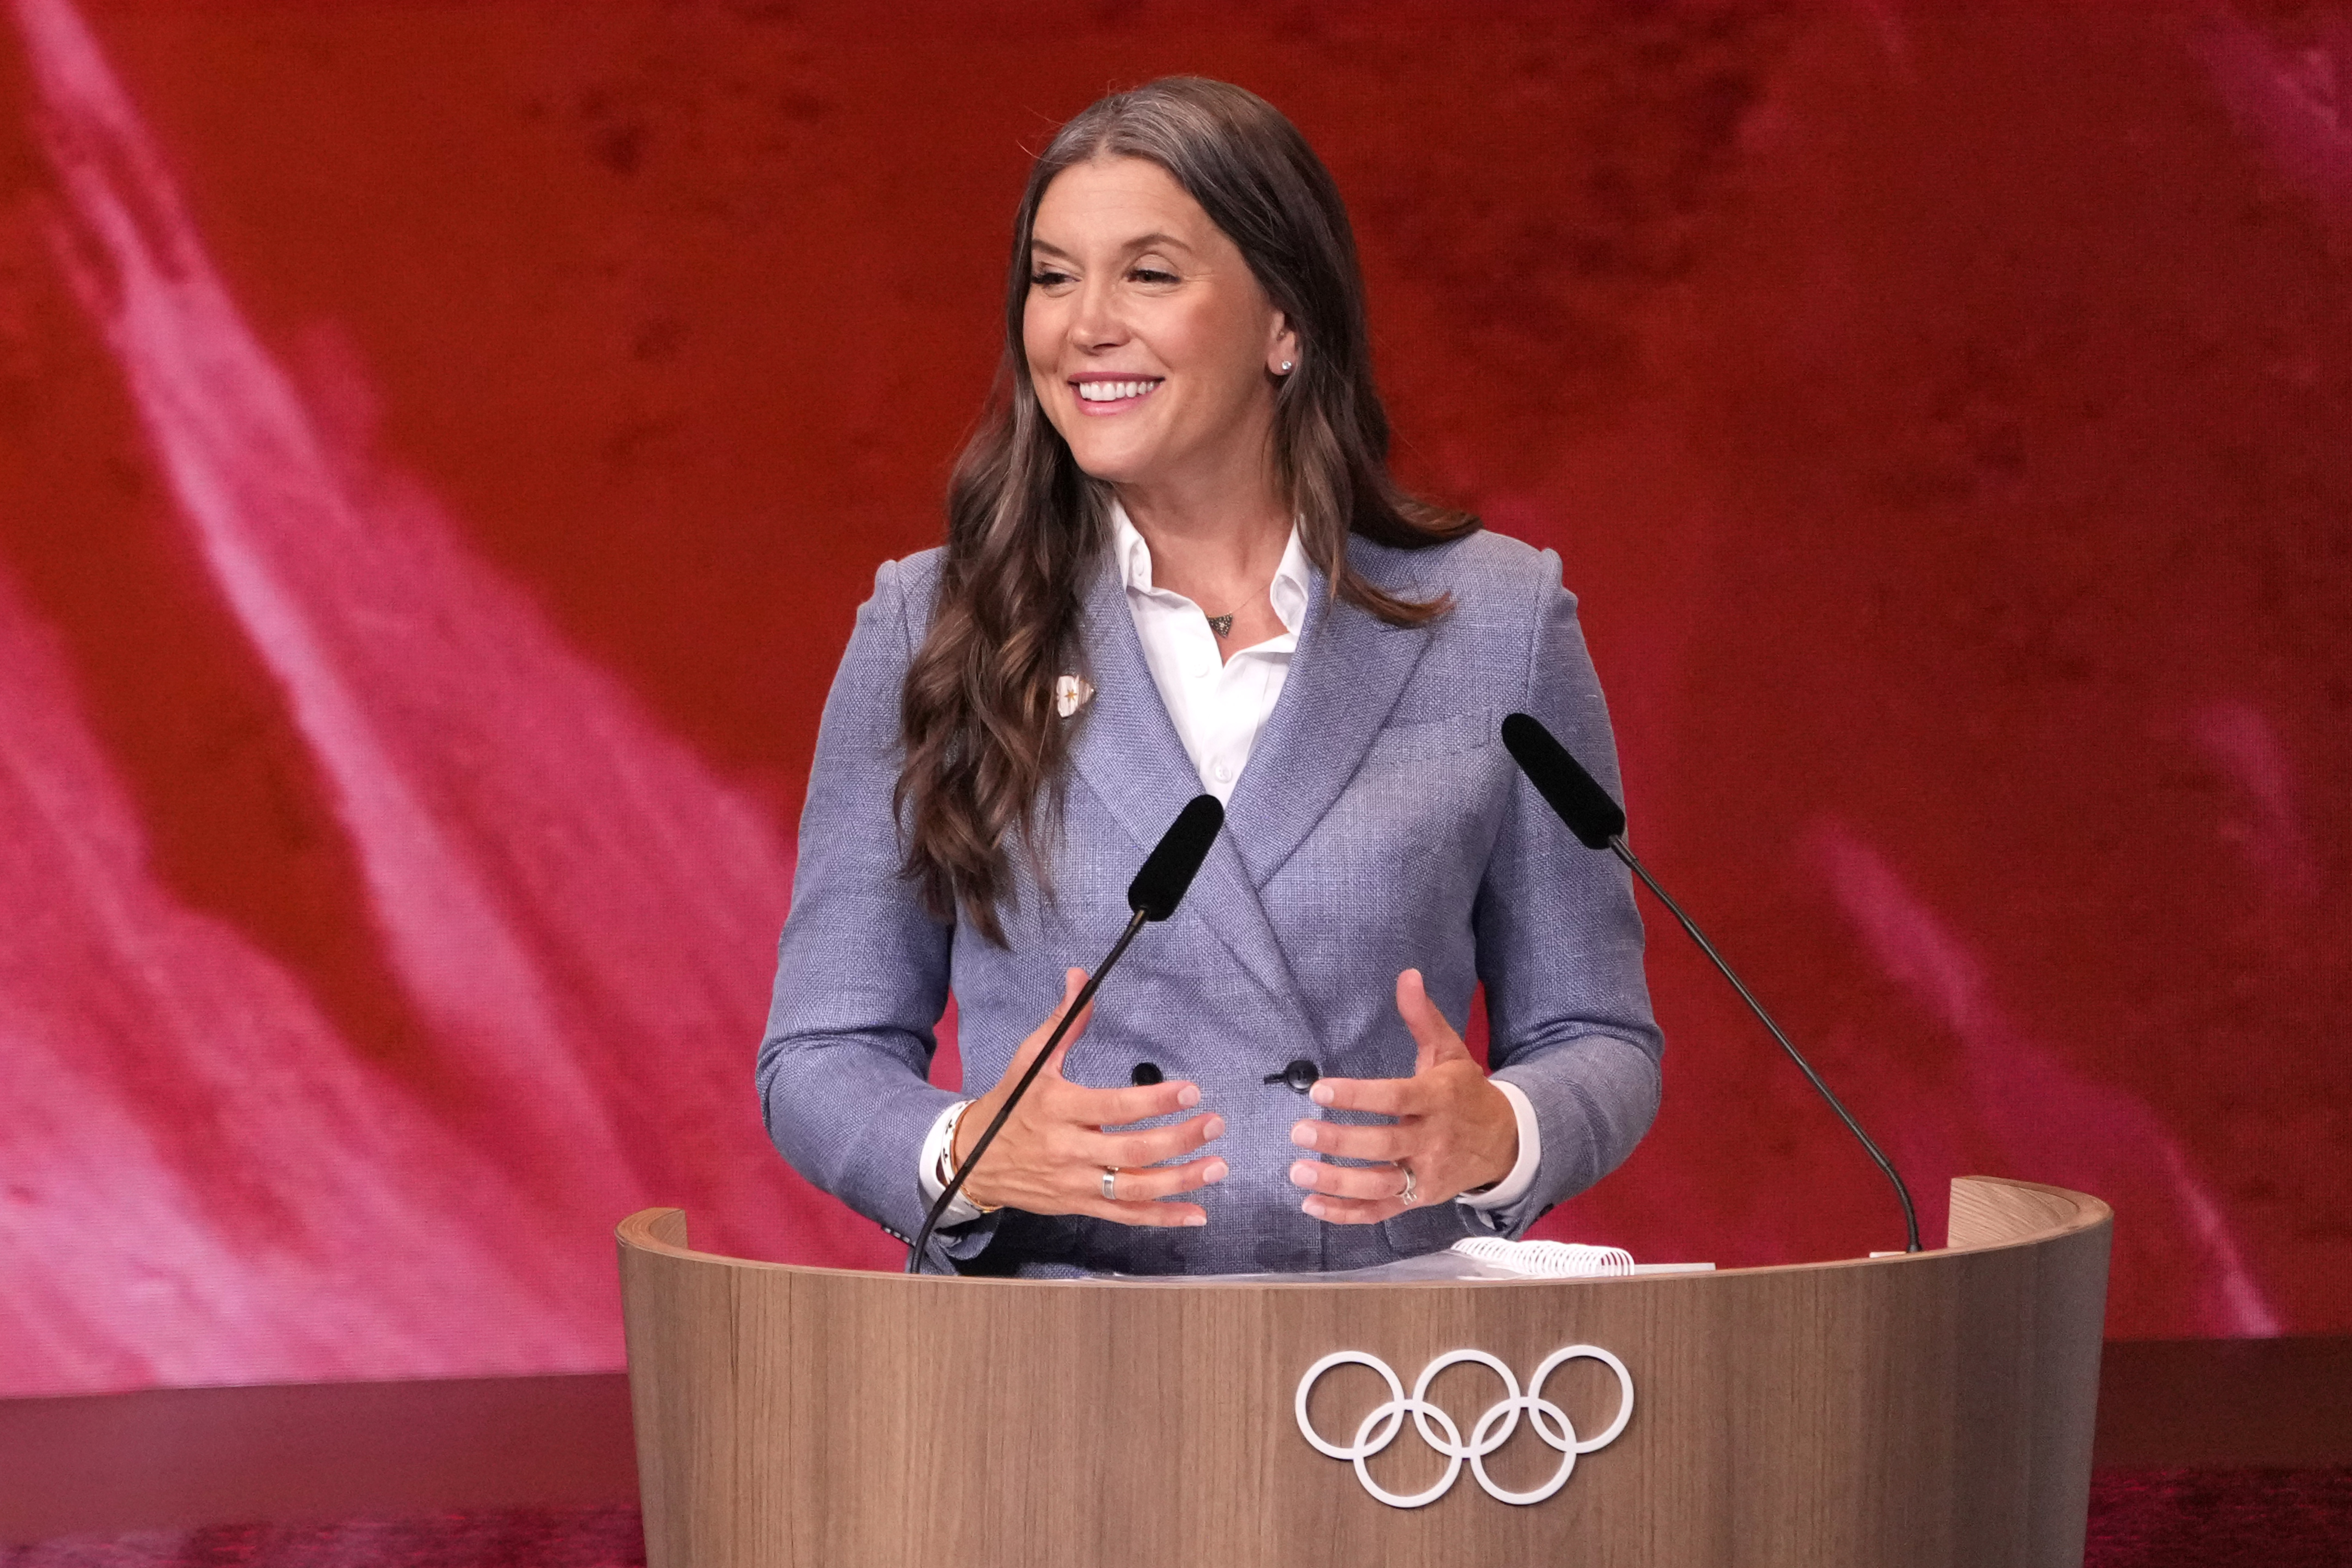 Salt Lake City Mayor Erin Mendenhall speaks about Salt Lake City's bid to host the 2034 Winter Olympics, during the 142nd IOC session at the 2024 Summer Olympics, Wednesday, July 24, 2024, in Paris, France. (AP Photo/David Goldman)